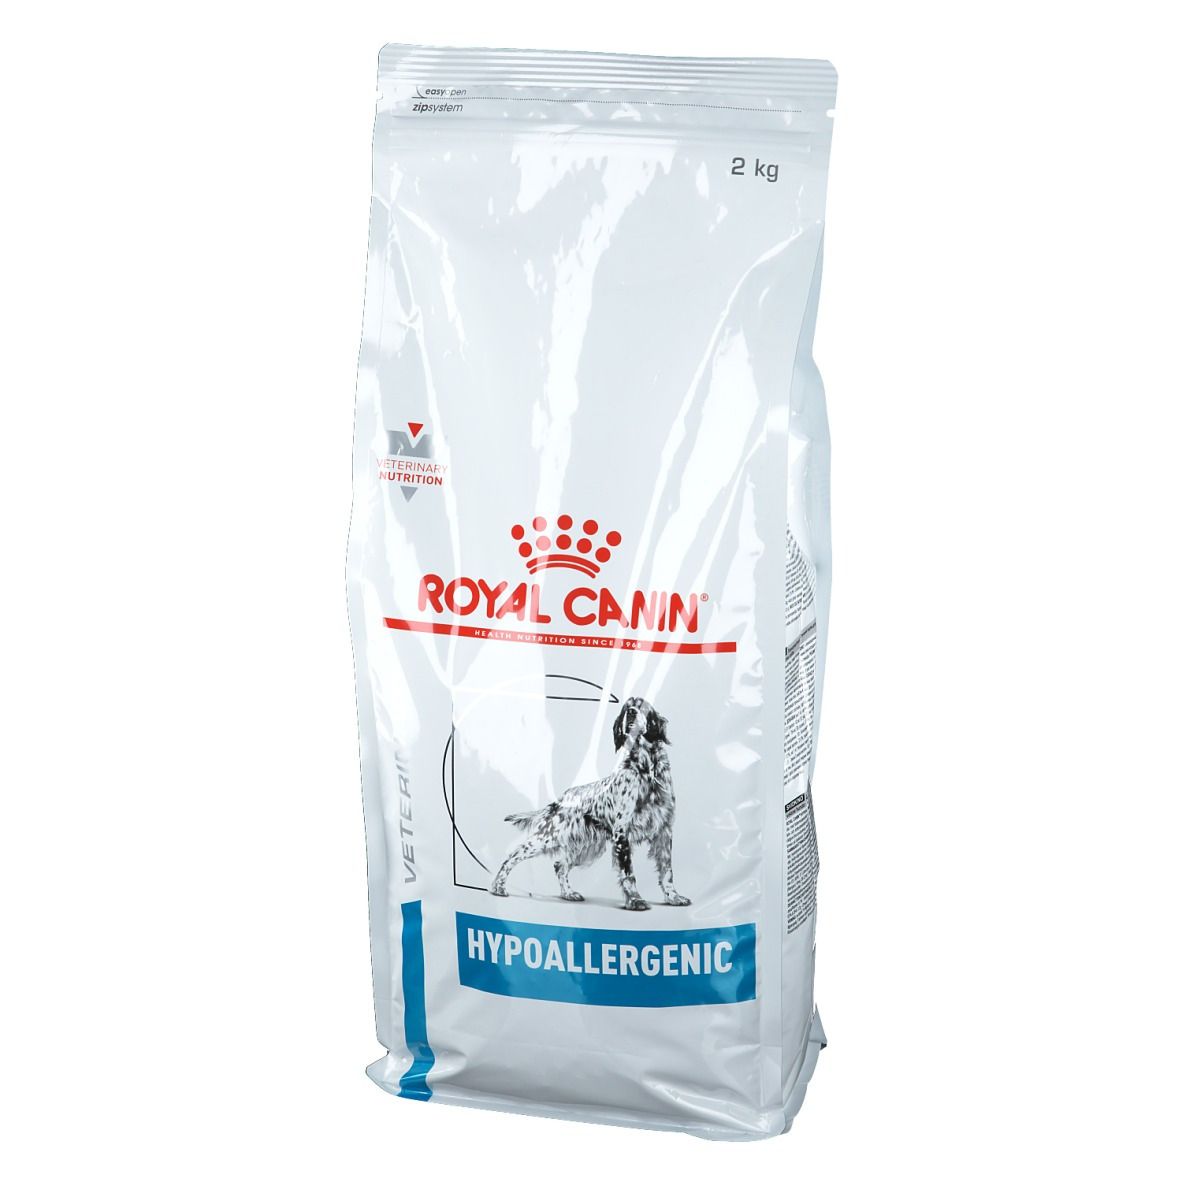 Royal Canin® Hypoallergenic